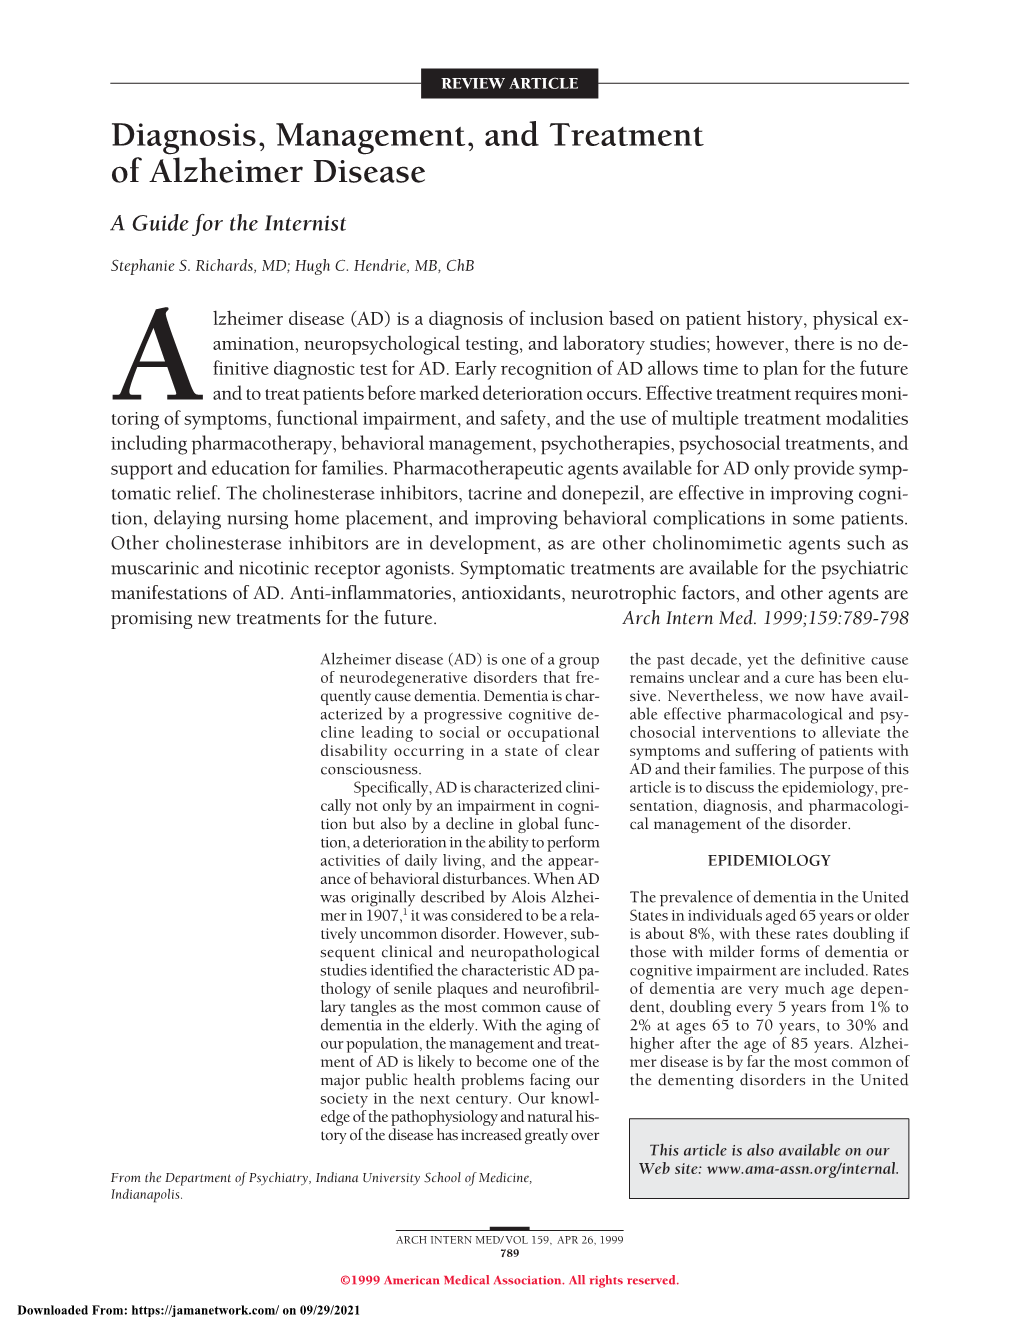 Diagnosis, Management, and Treatment of Alzheimer Disease a Guide for the Internist